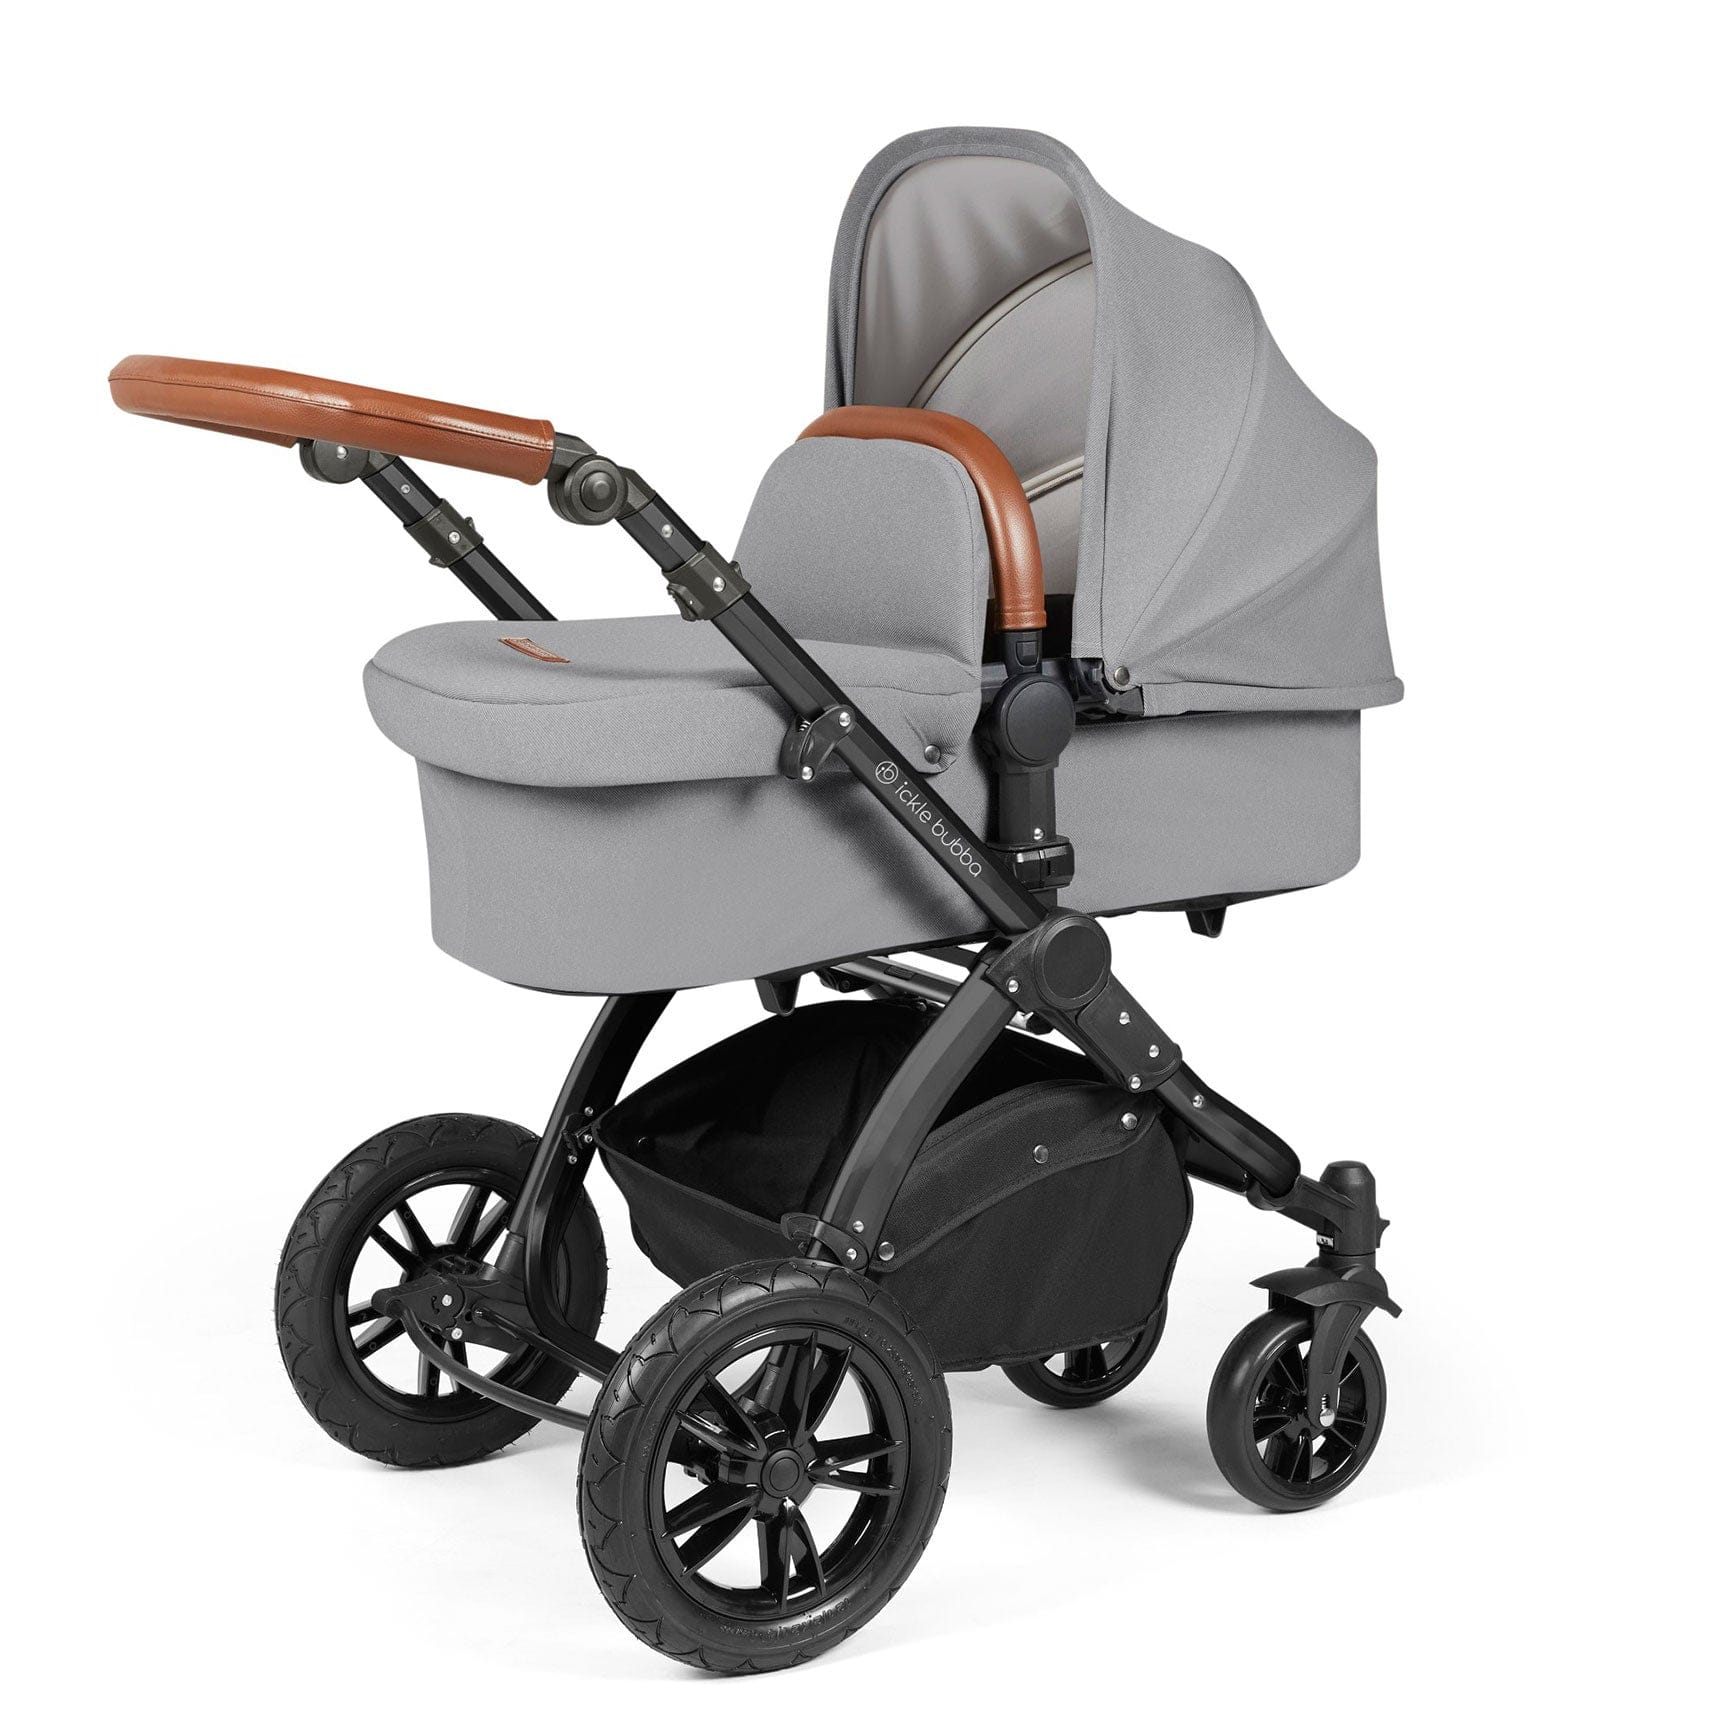 Ickle Bubba travel systems Ickle Bubba Stomp Luxe 2 in 1 Plus Pushchair & Carrycot - Black/Pearl Grey/Tan 10-003-001-211